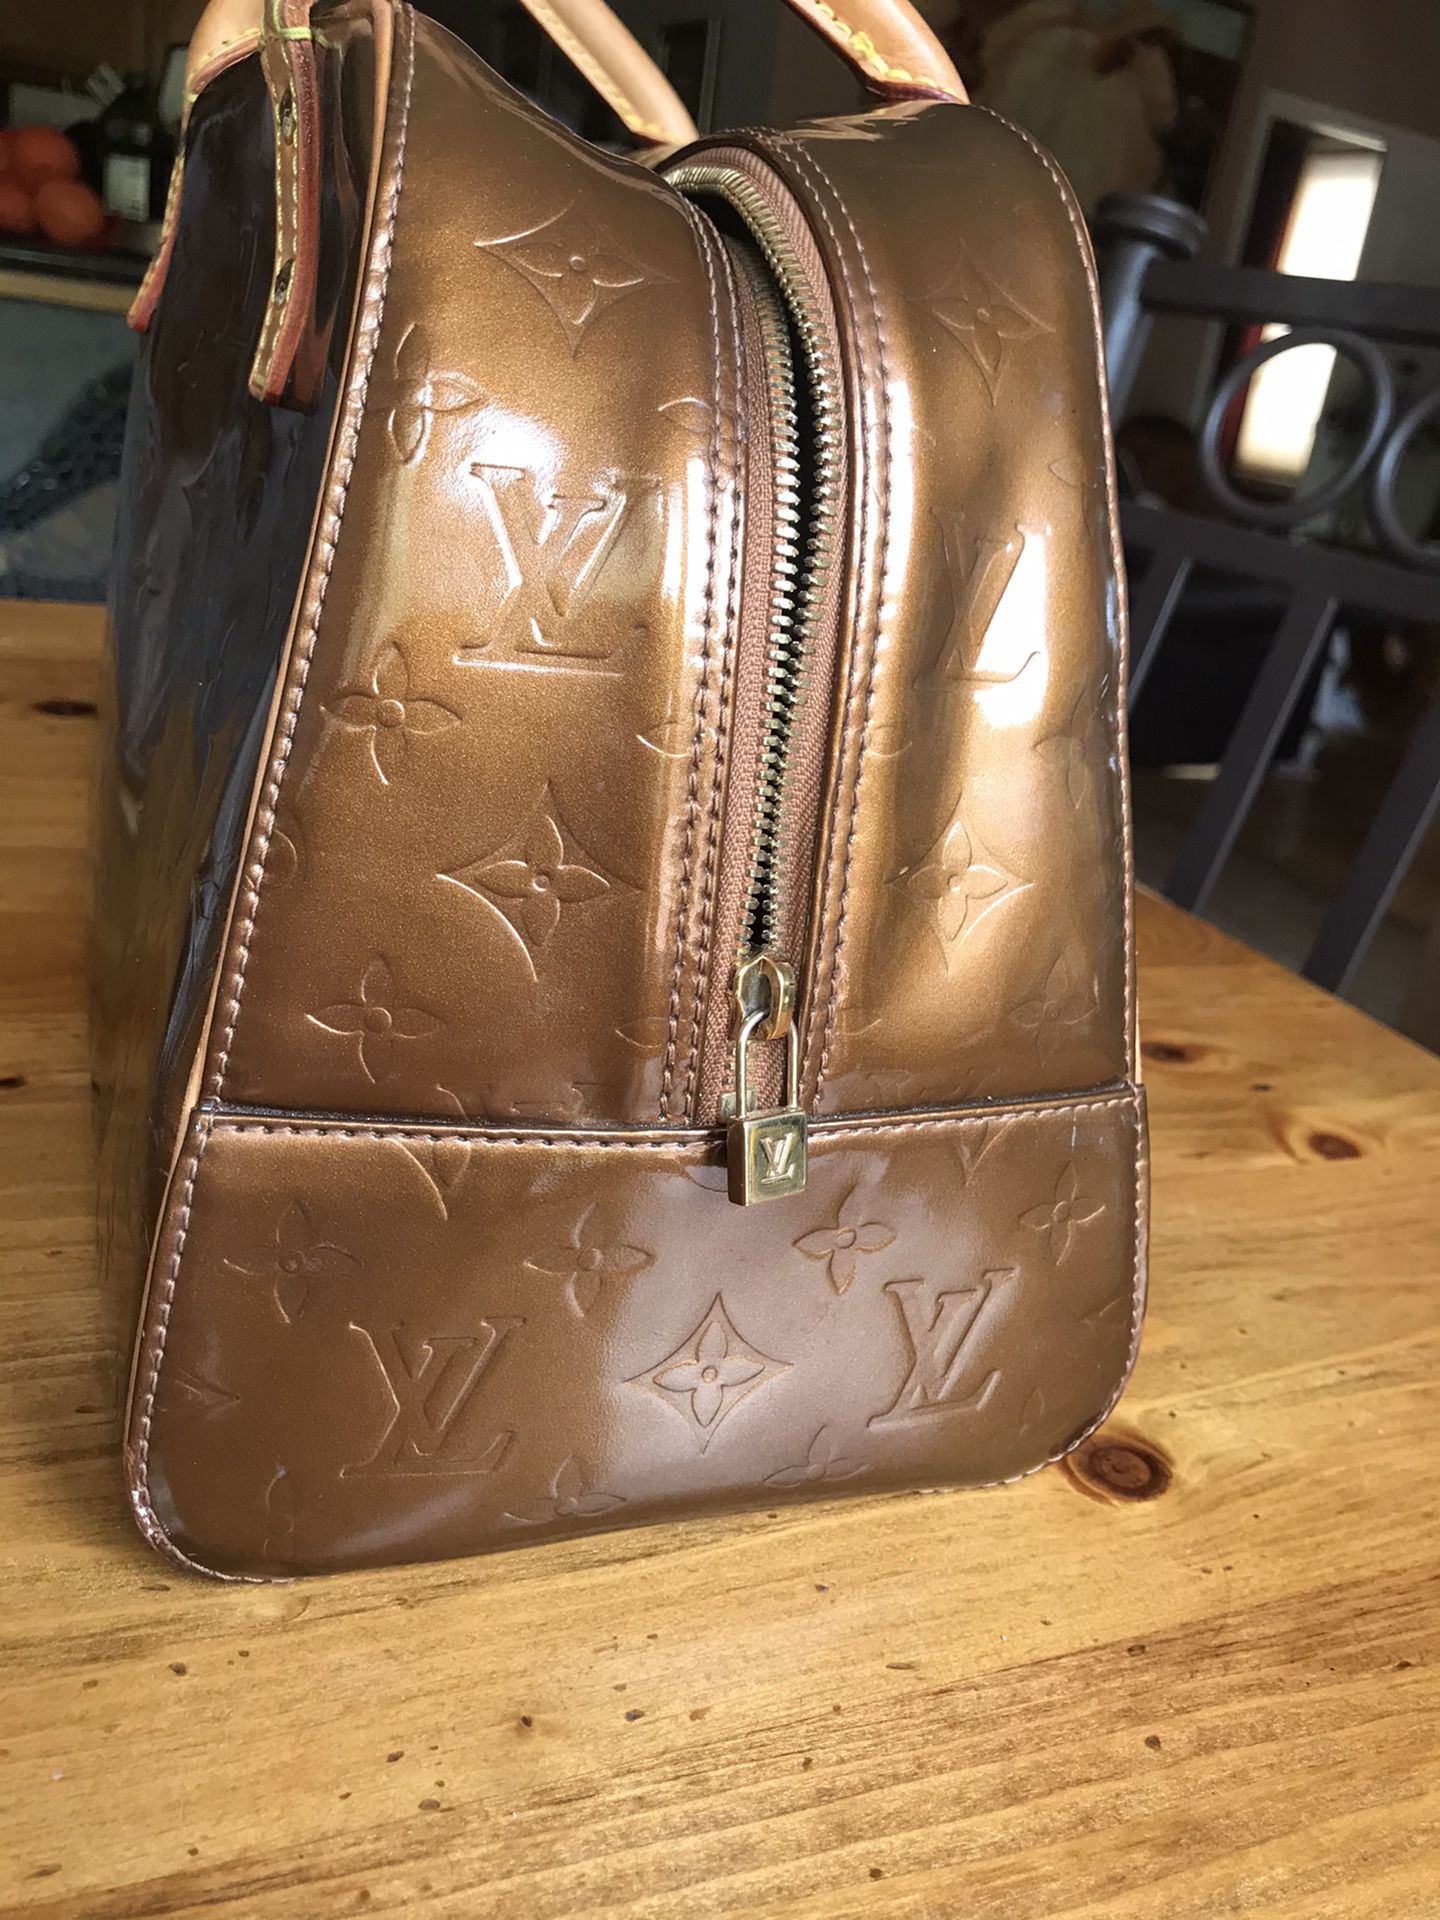 Louis Vuitton Hand Bag for Sale in Old Saybrook, CT - OfferUp